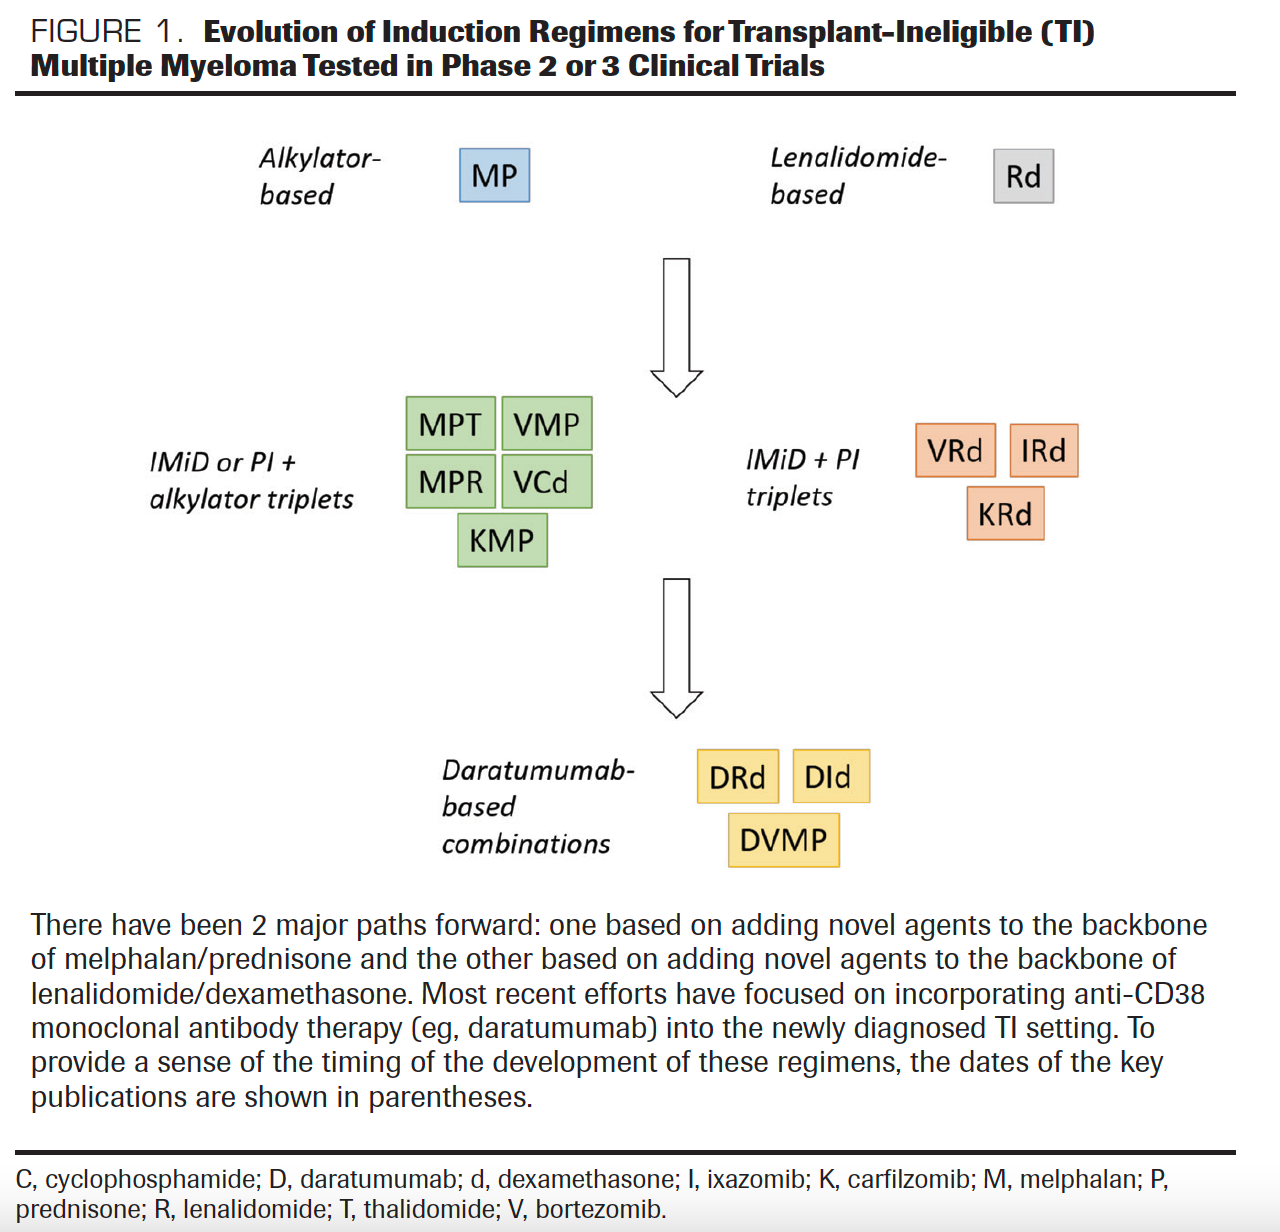 FIGURE 1. Evolution of Induction Regimens for Transplant-Ineligible (TI) Multiple Myeloma Tested in Phase 2 or 3 Clinical Trials